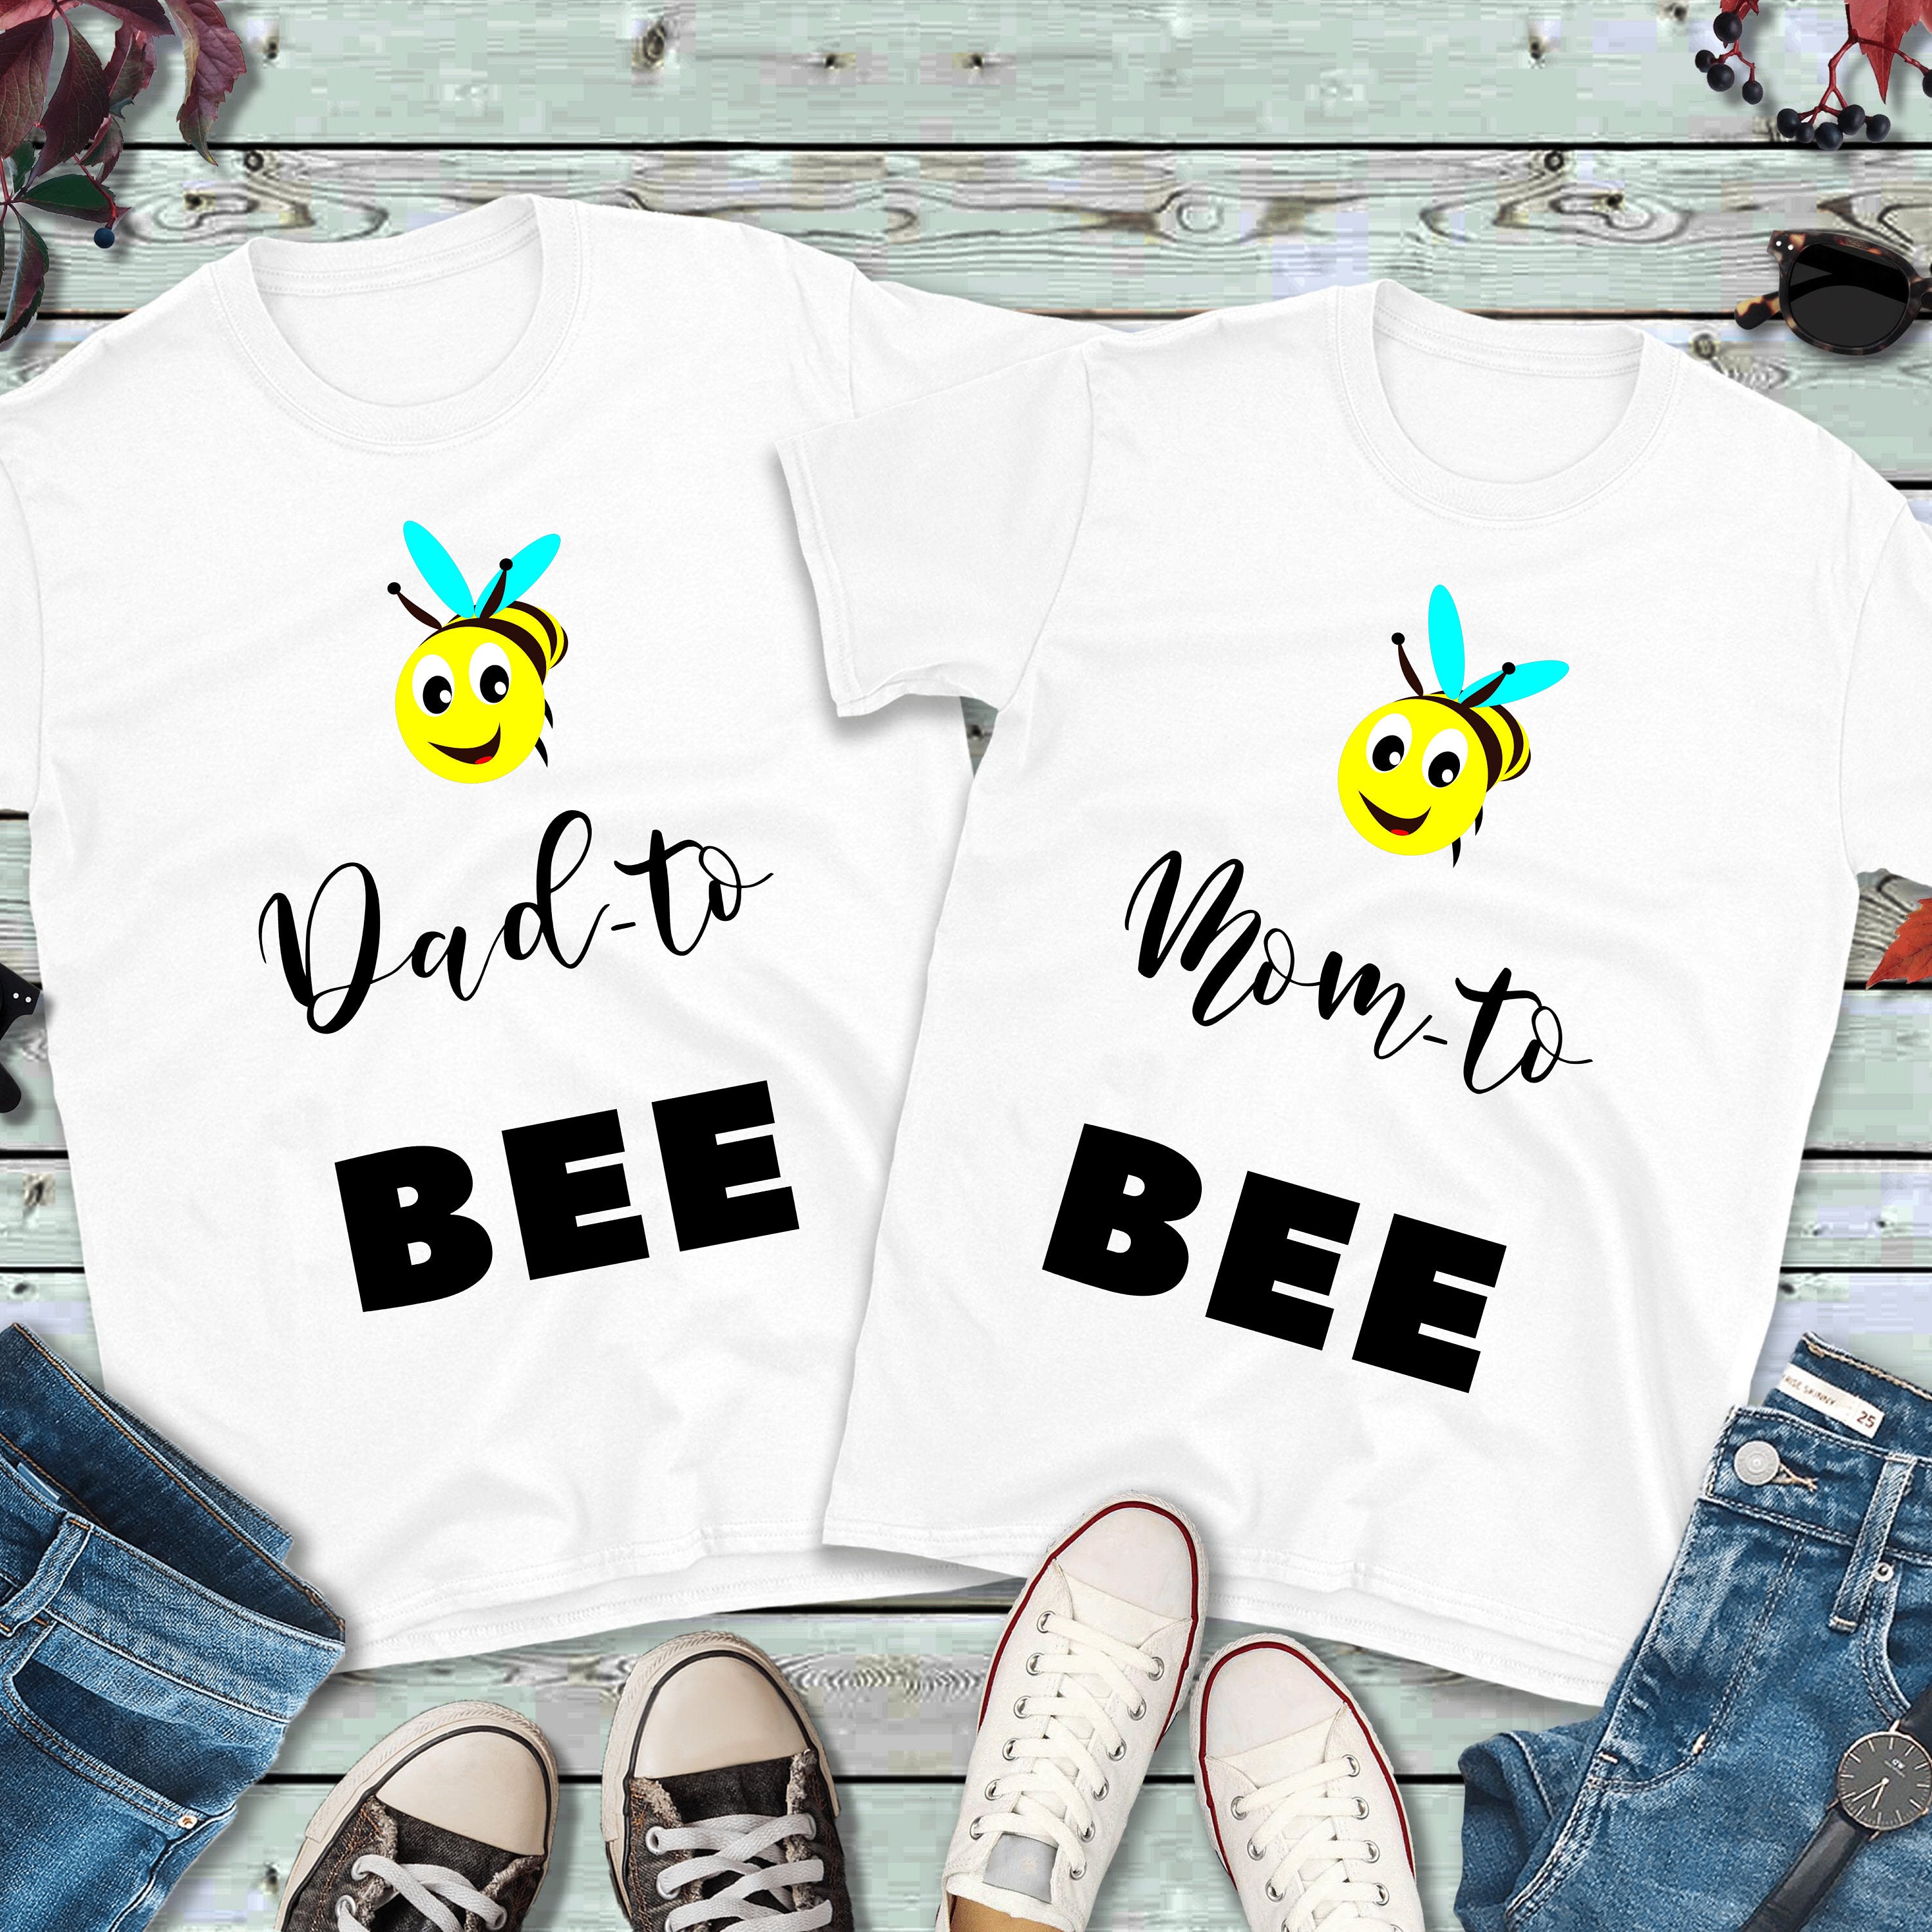 Funny Couple Shirts, Couple Shirts, Valentines Gifts For Him, Matching Shirts For Couples, Best Couple Shirts, Dad and Mom to Bee Shirts - MamaBuzz Creations